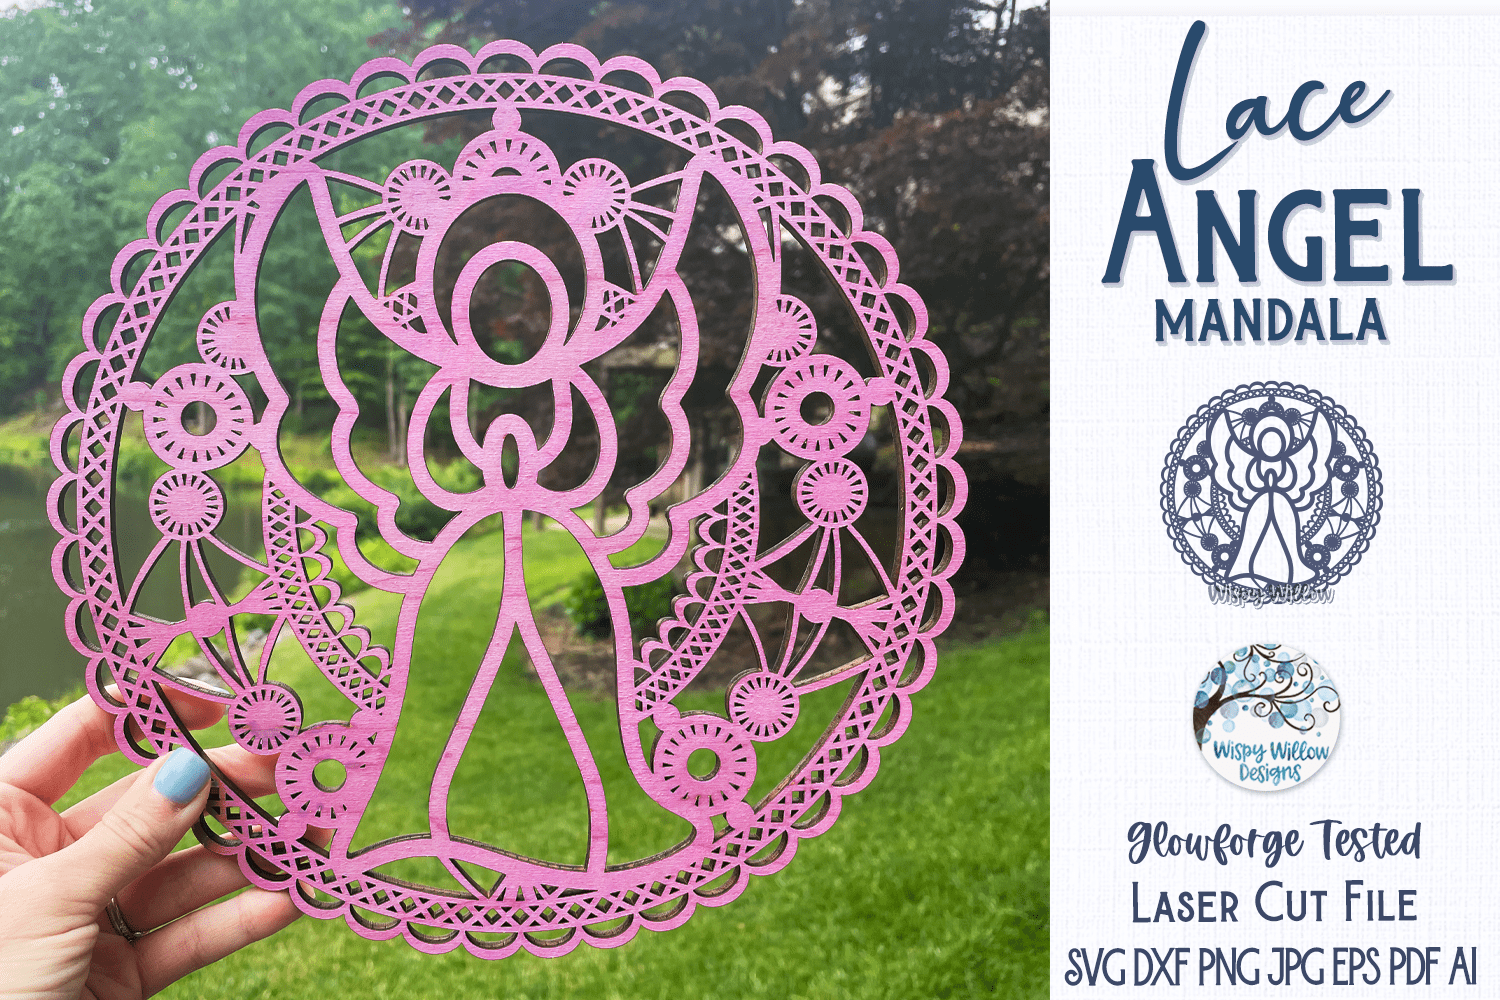 Lace Angel Mandala for Laser or Glowforge Wispy Willow Designs Company